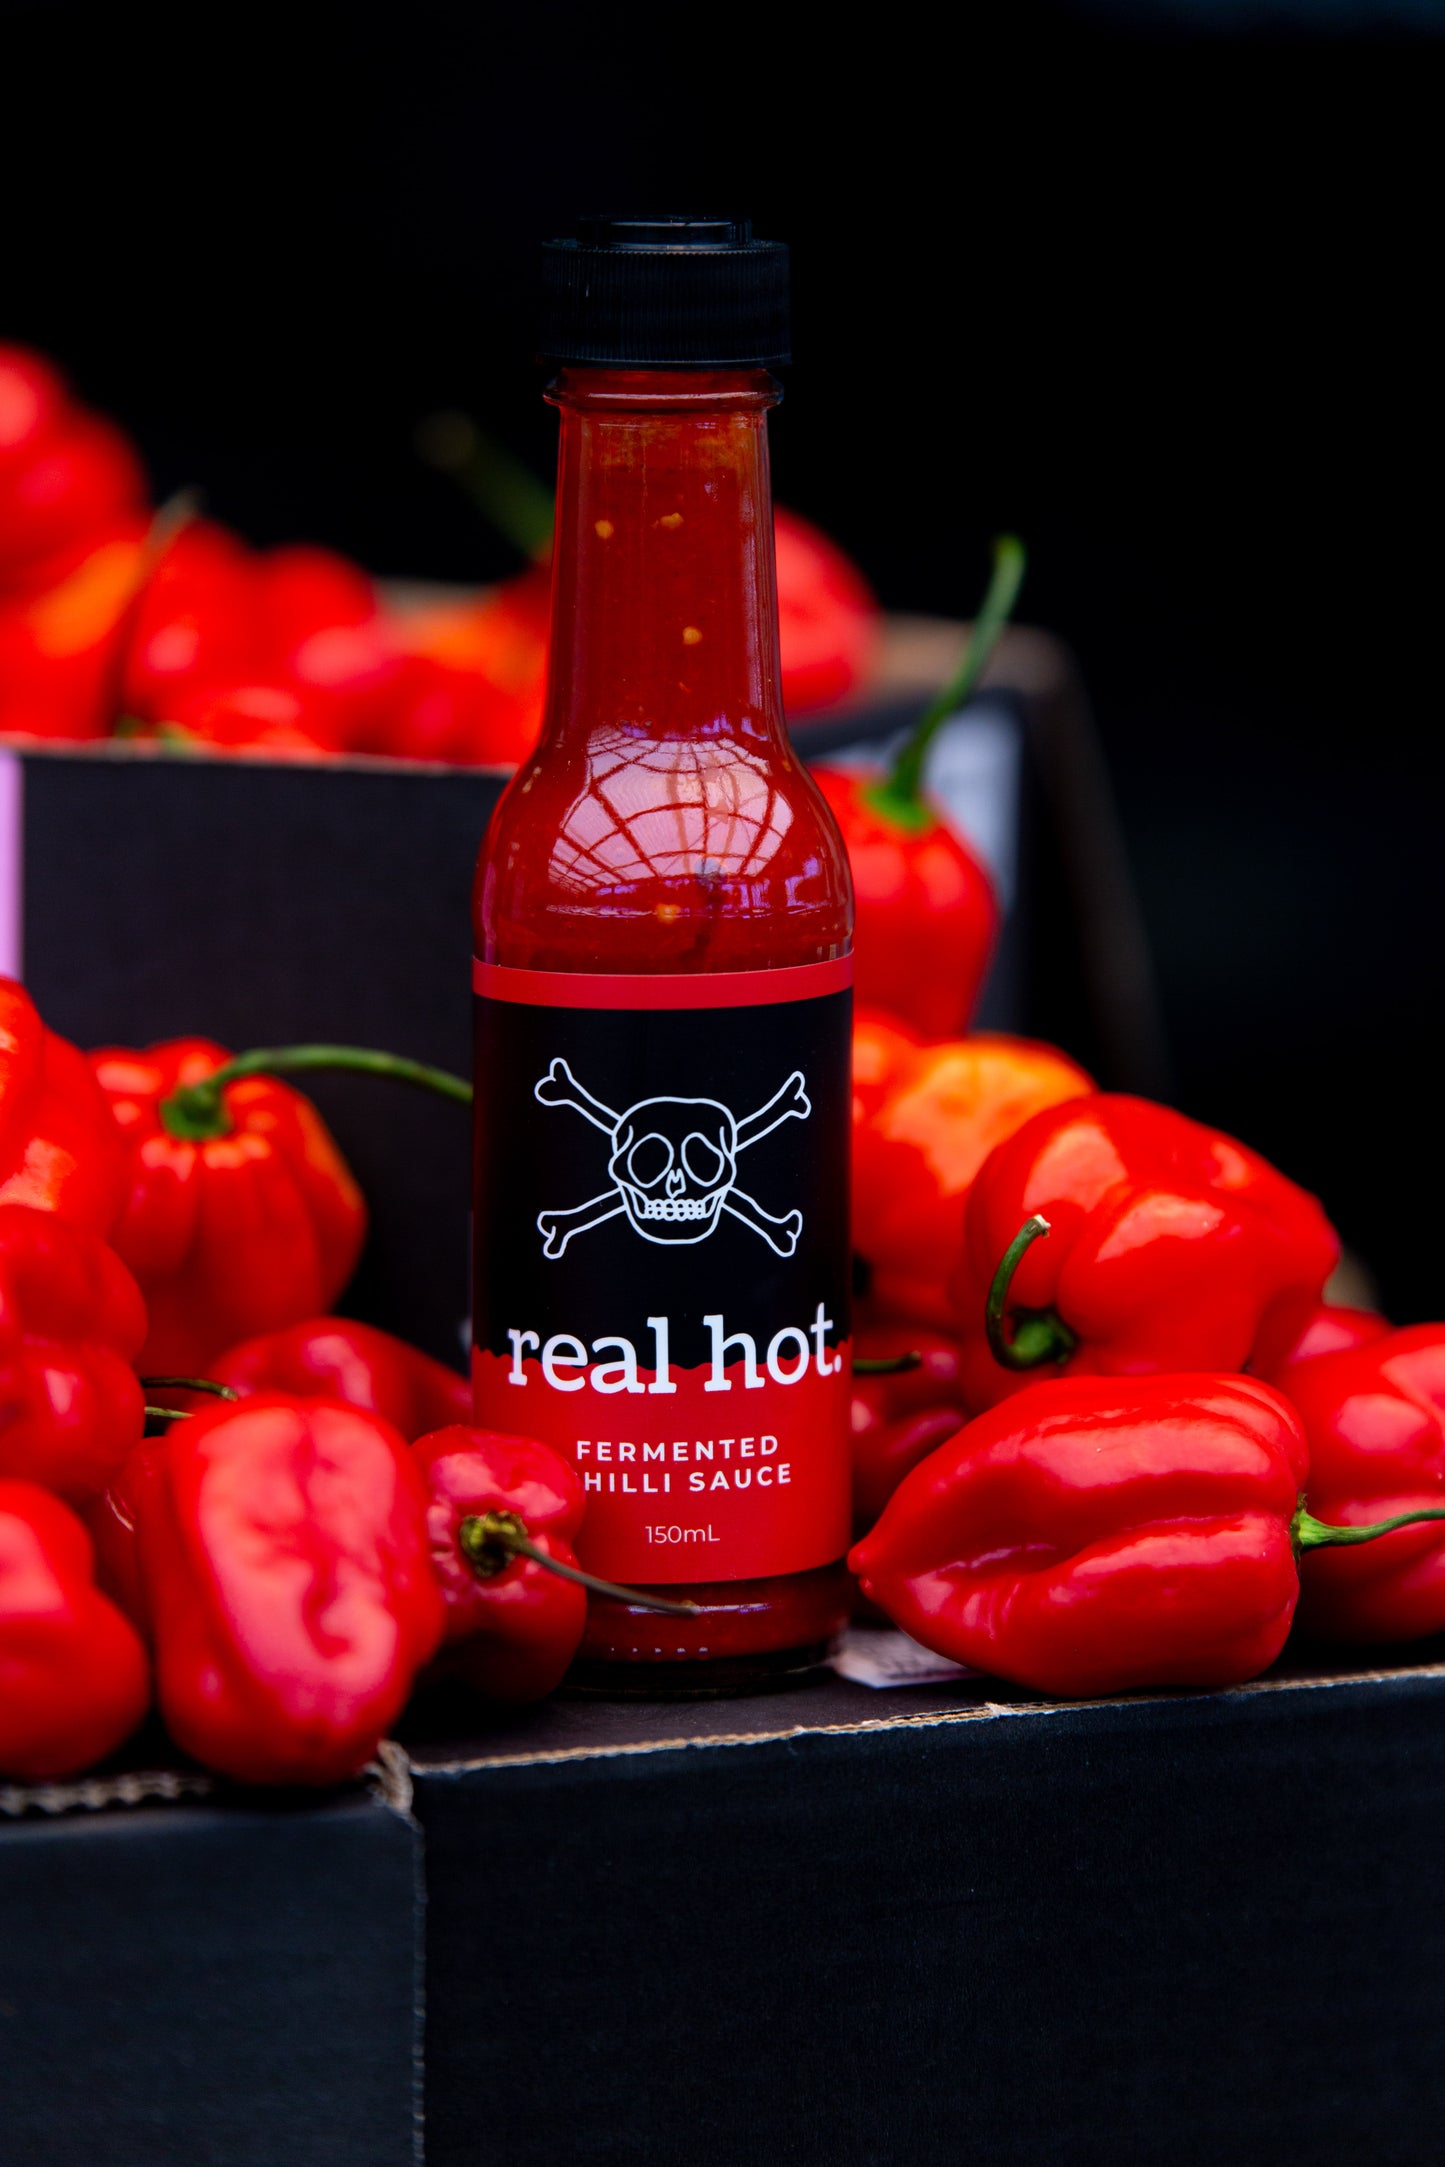 "Real Hot" Fermented Chilli Sauce 150ml